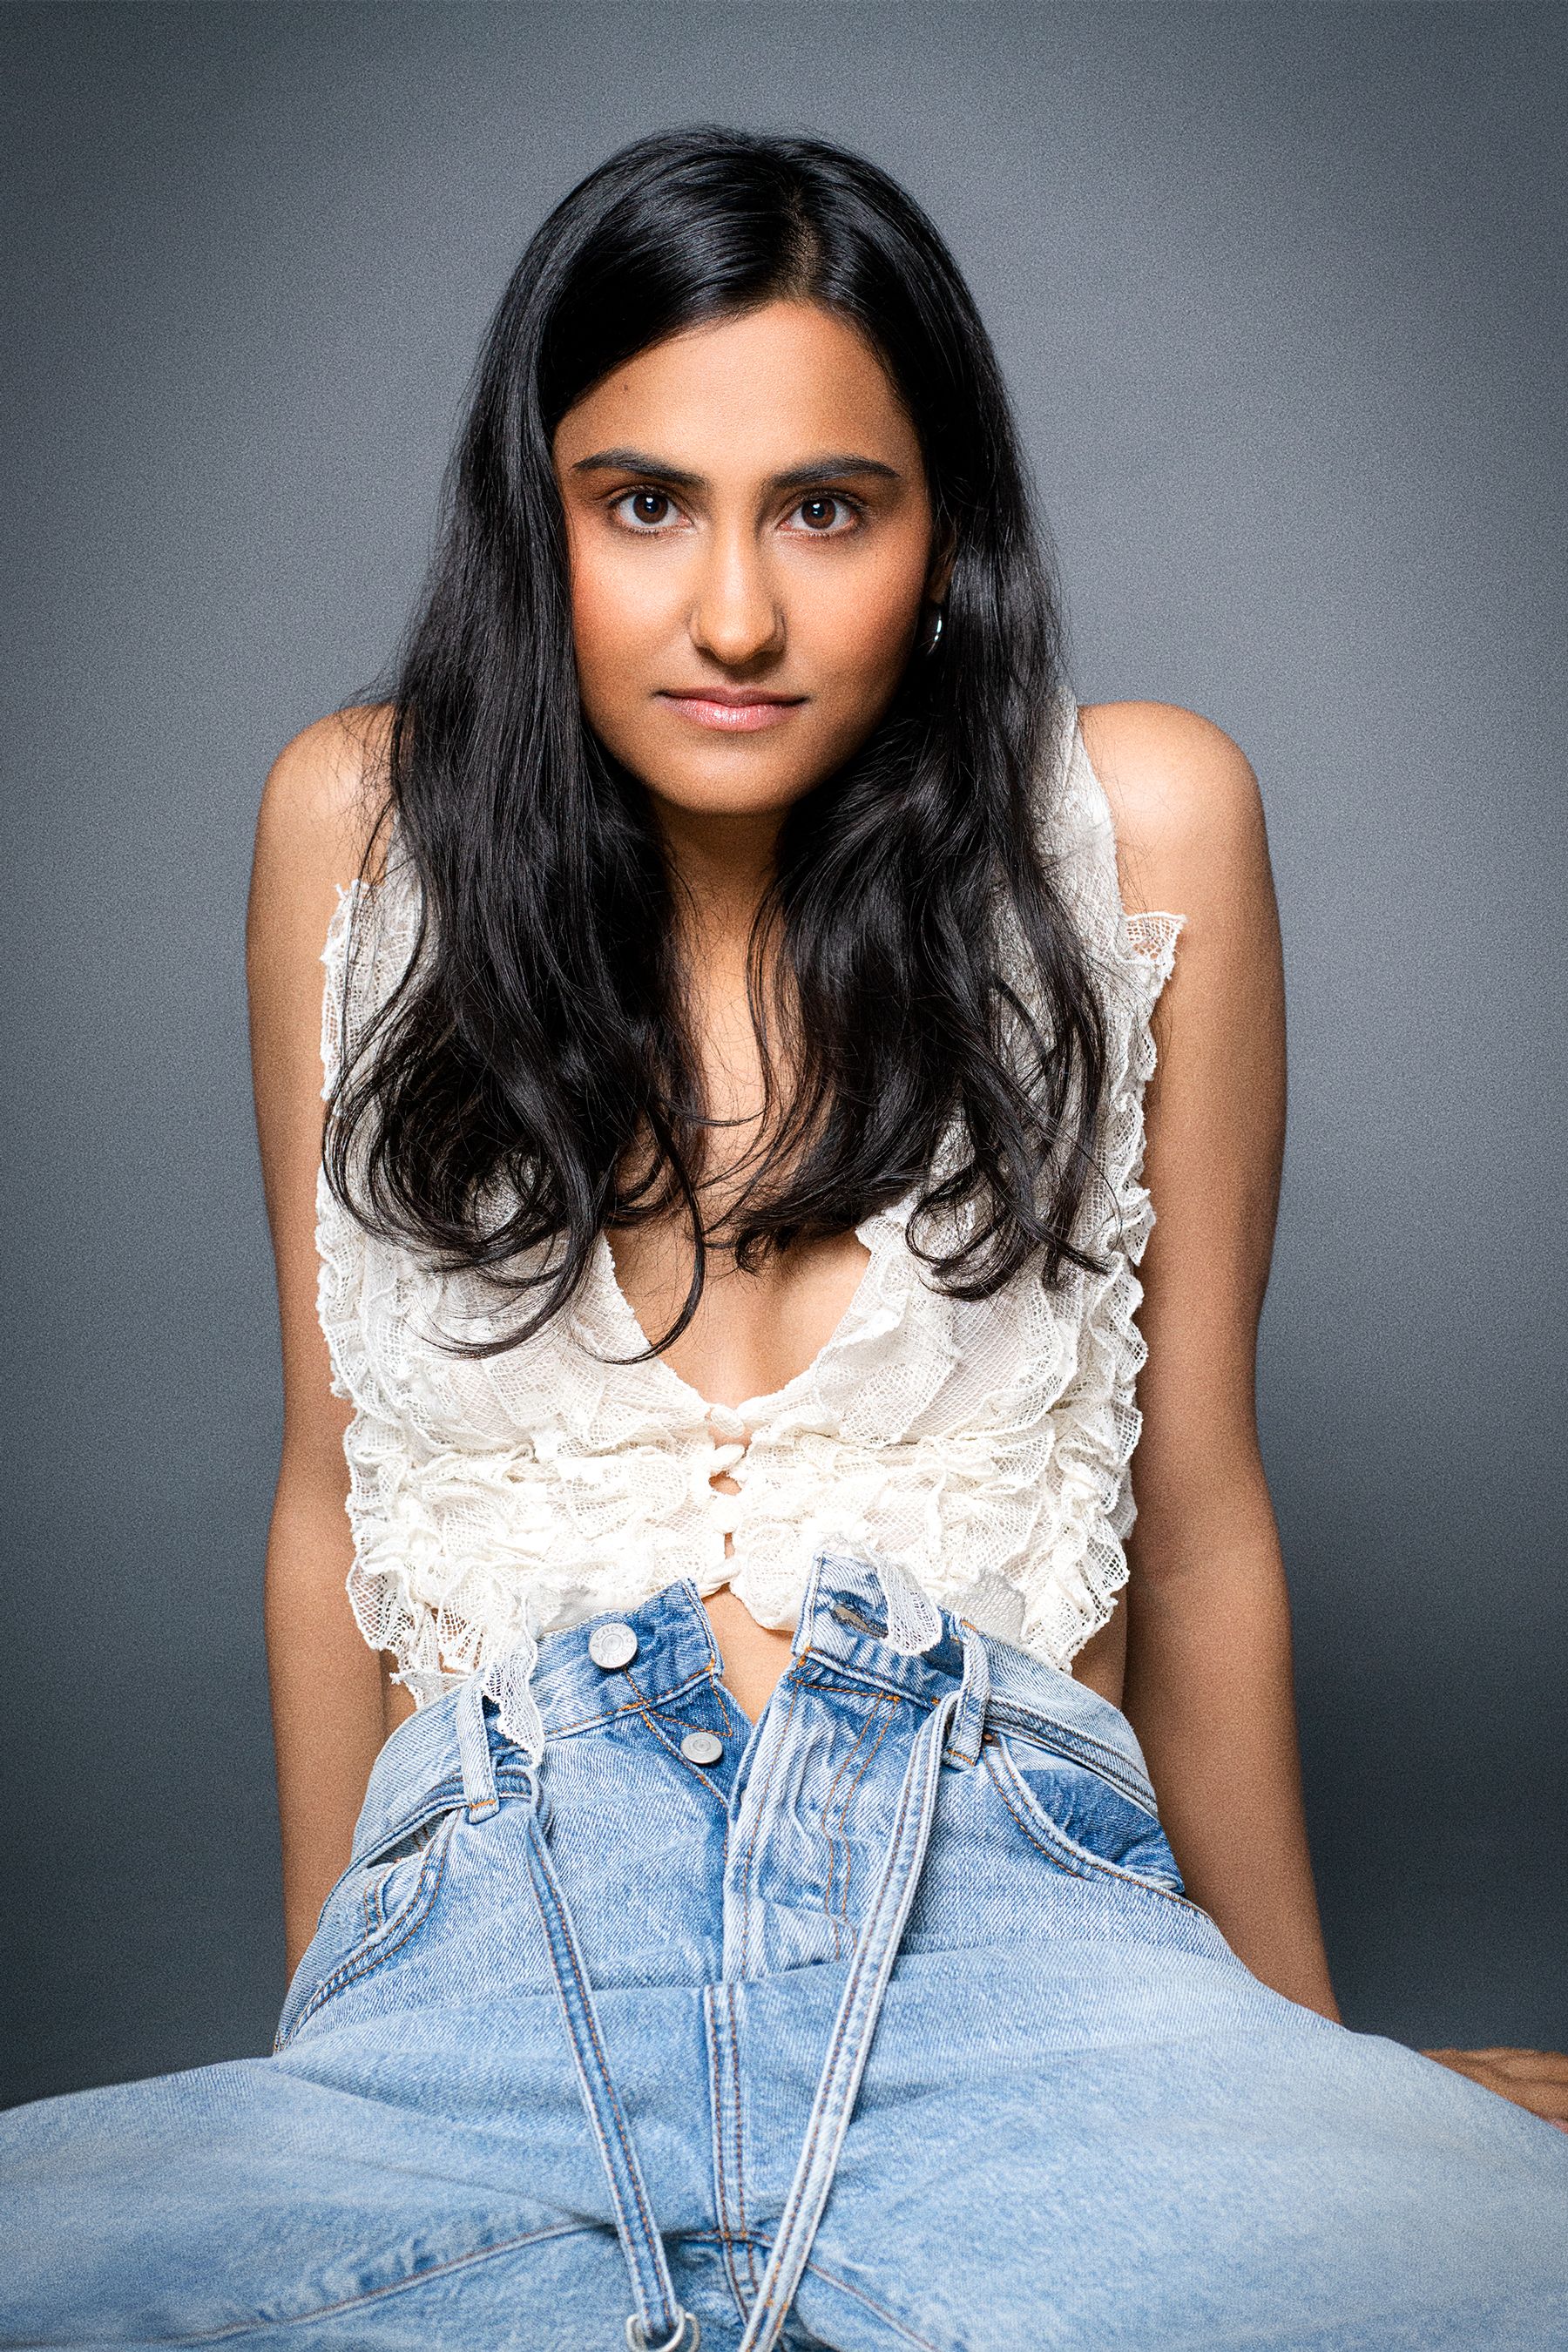 The Sex Lives of College Girls Star Amrit Kaur Talks Defying Stereotypes image